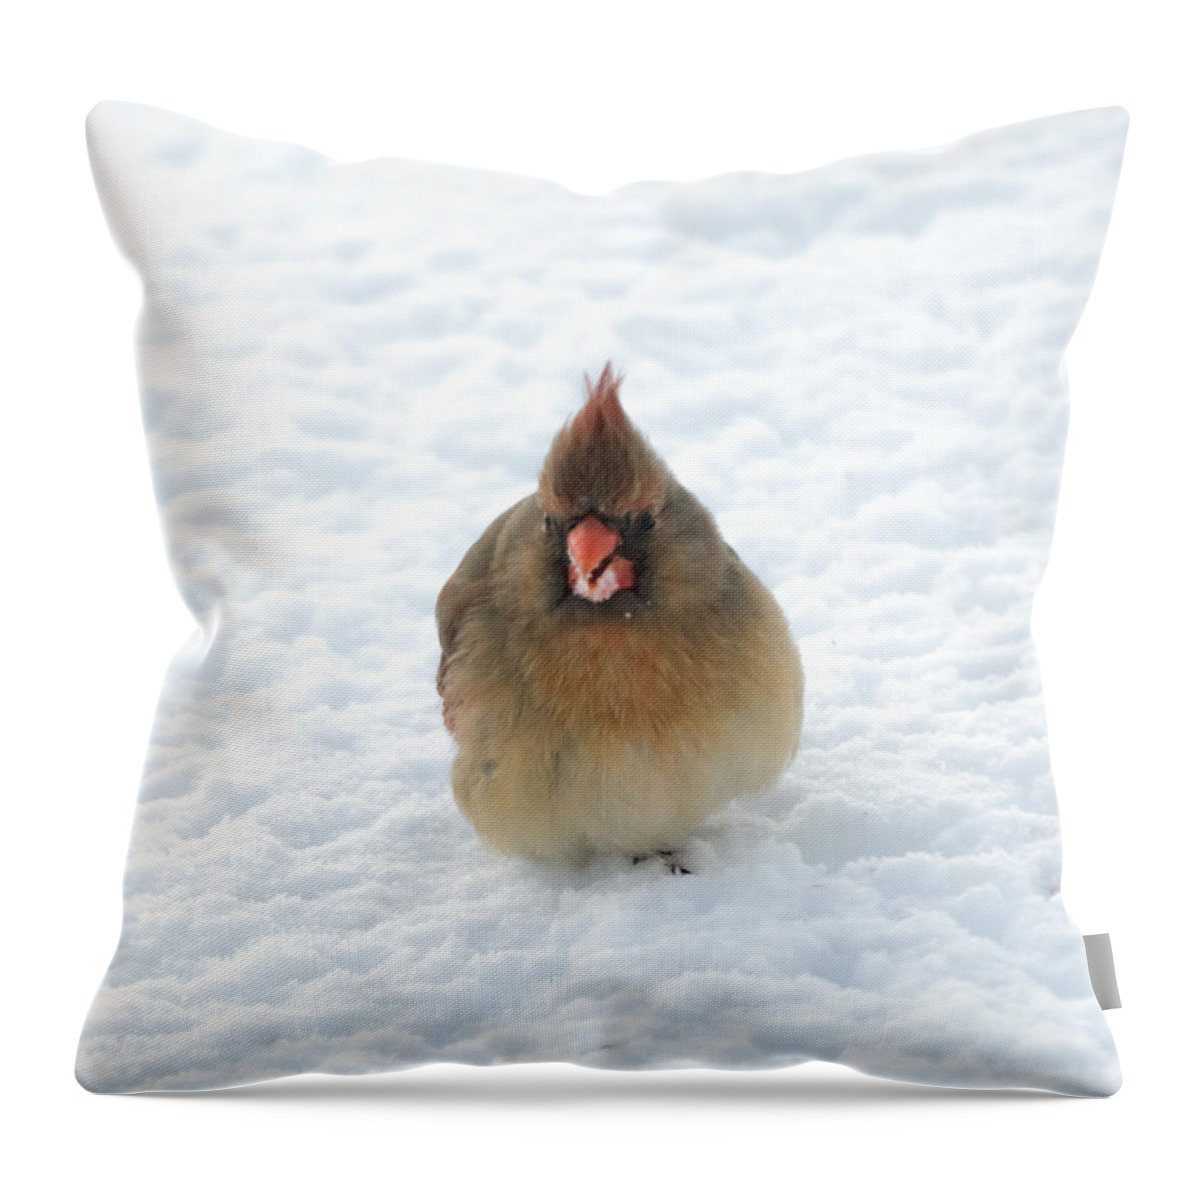 Cardinal Throw Pillow featuring the photograph Snow Beard by Holden The Moment